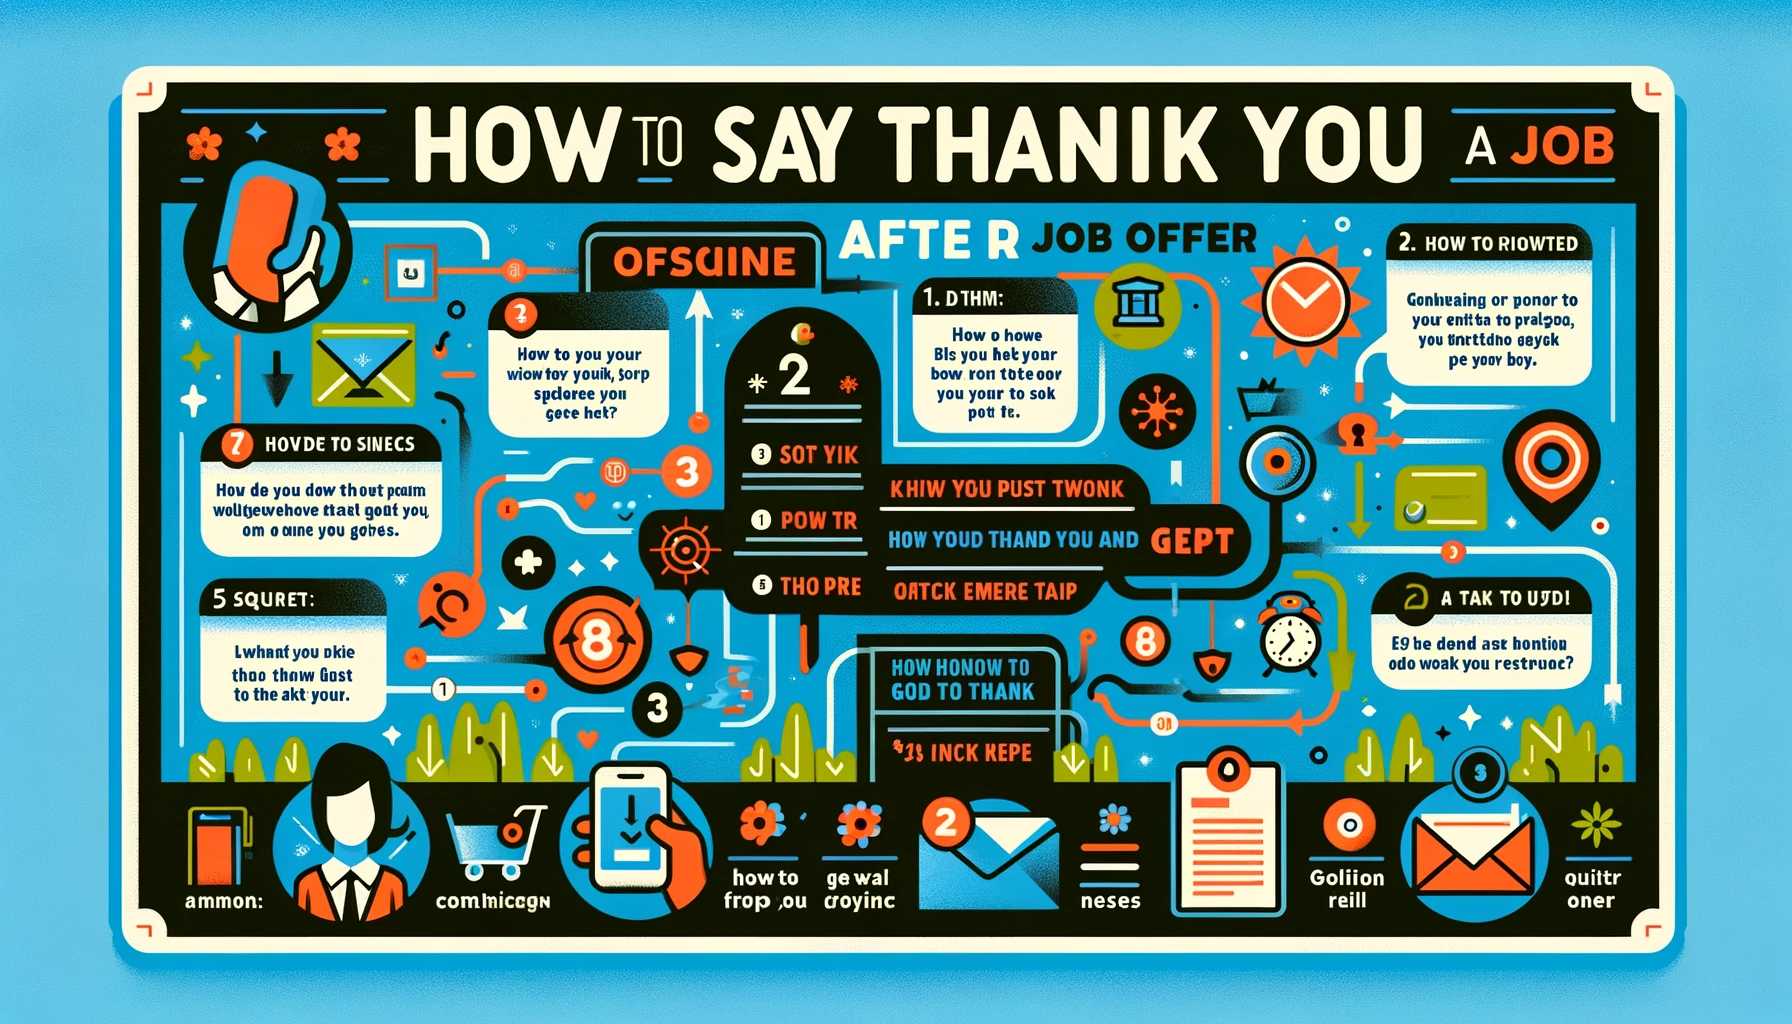 How to Say Thank you After a Job Offer (With Examples)